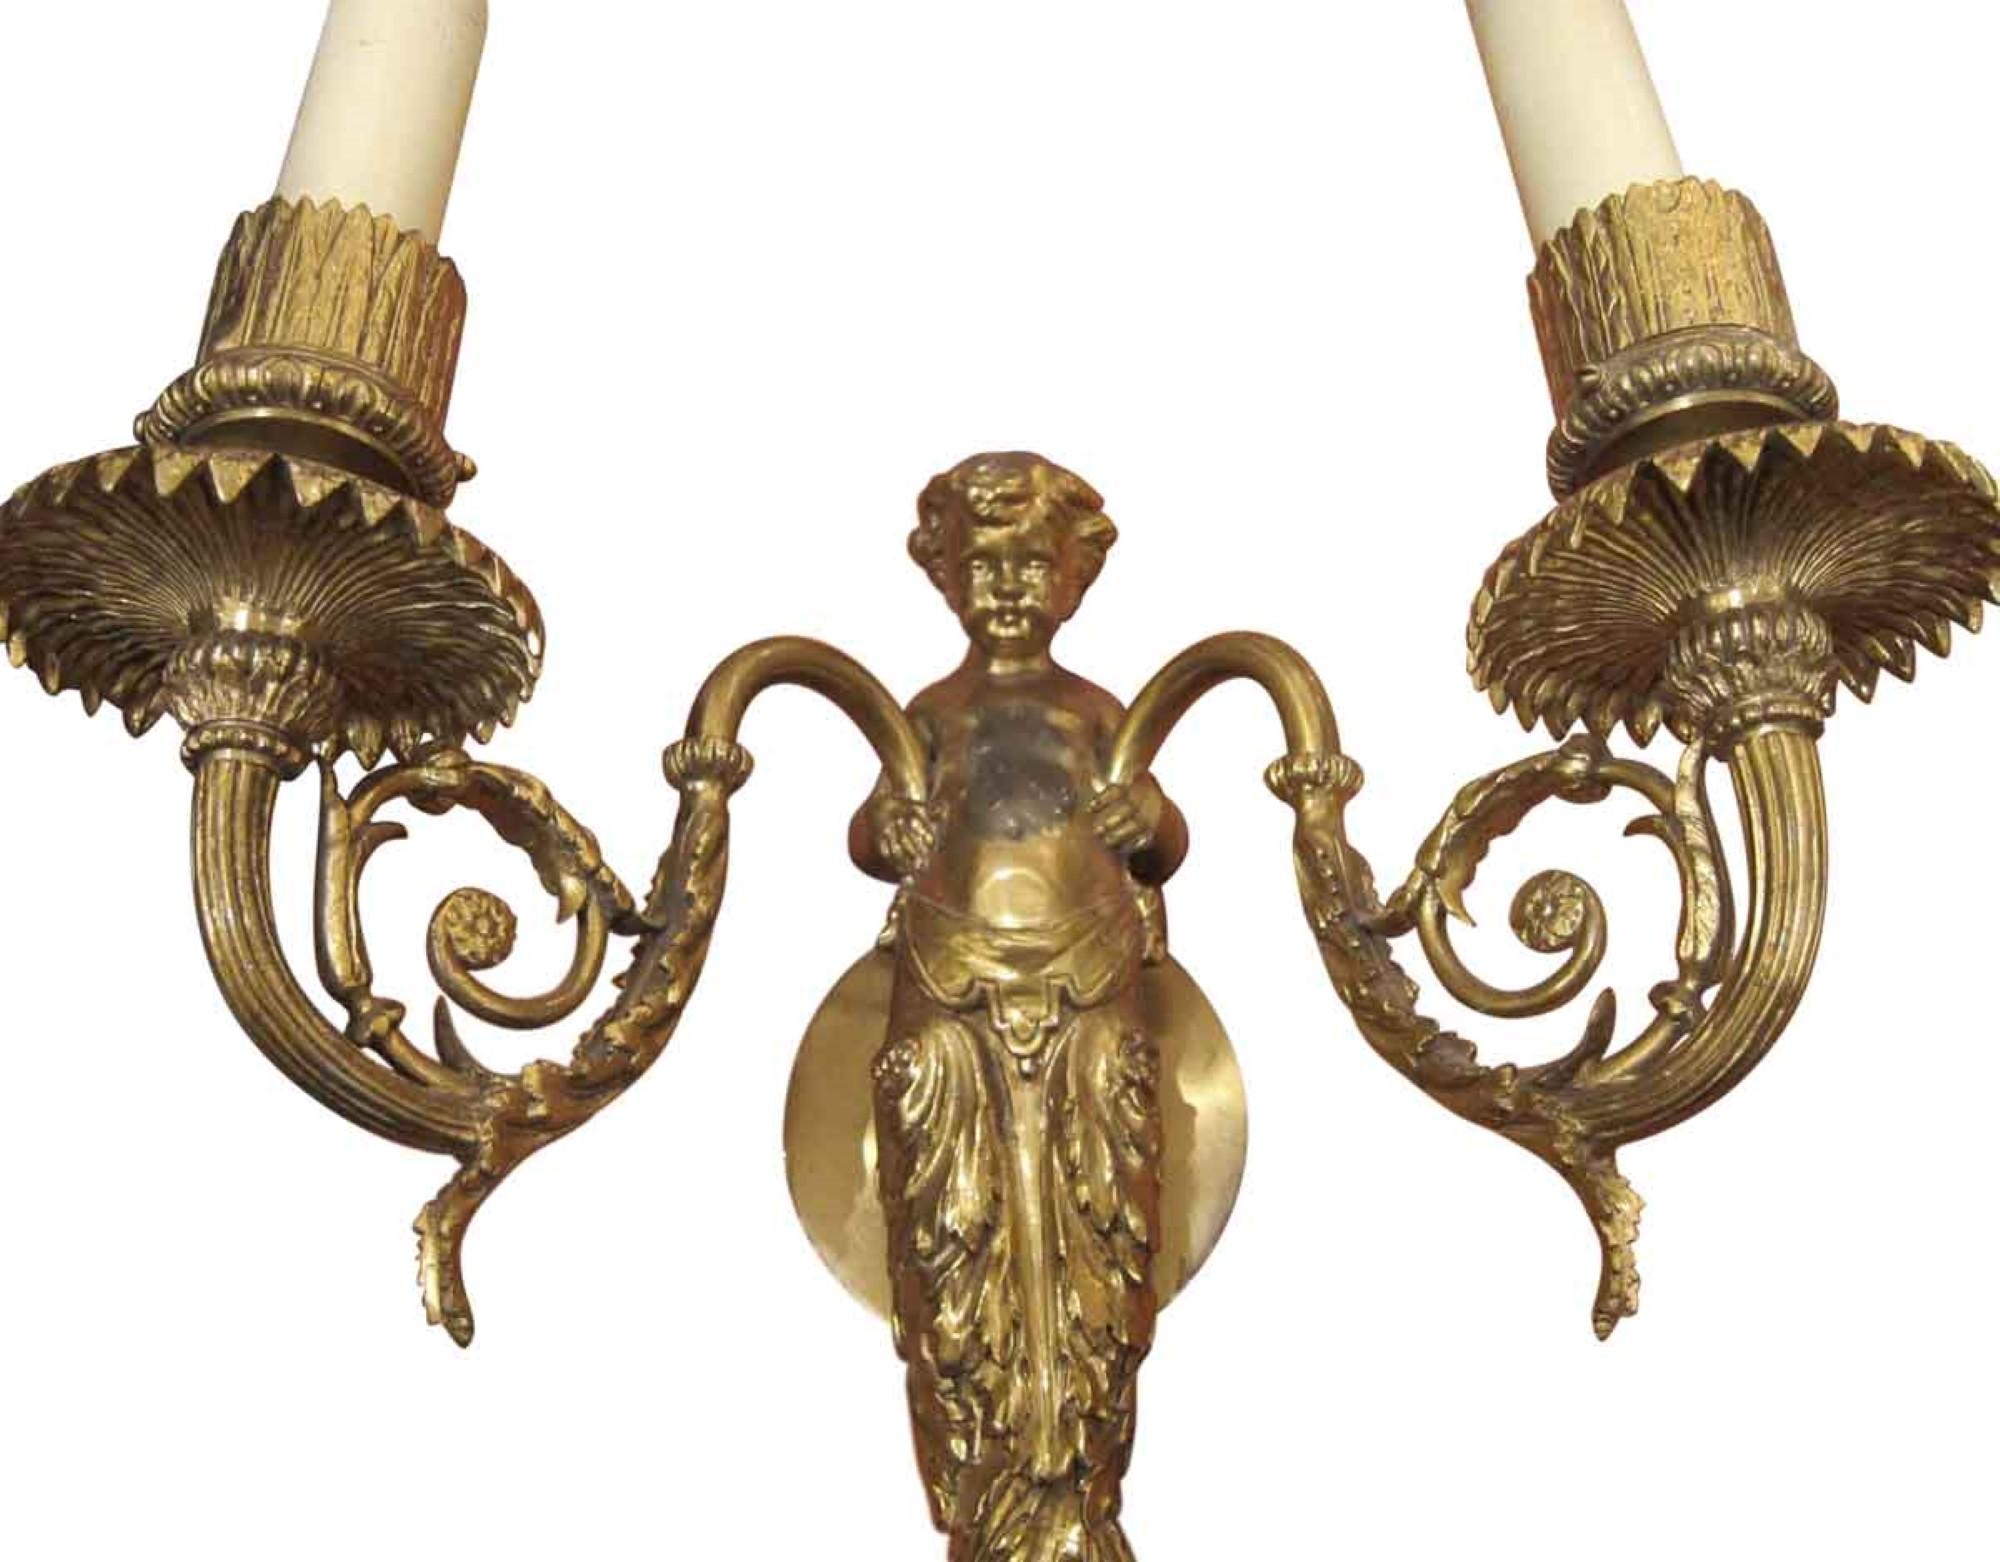 This pair of elegant bronze double arm wall sconces are from the early 1920s. Featuring putti details in center. Finely cast. Sold as a pair. This can be seen at our 400 Gilligan St location in Scranton. PA.